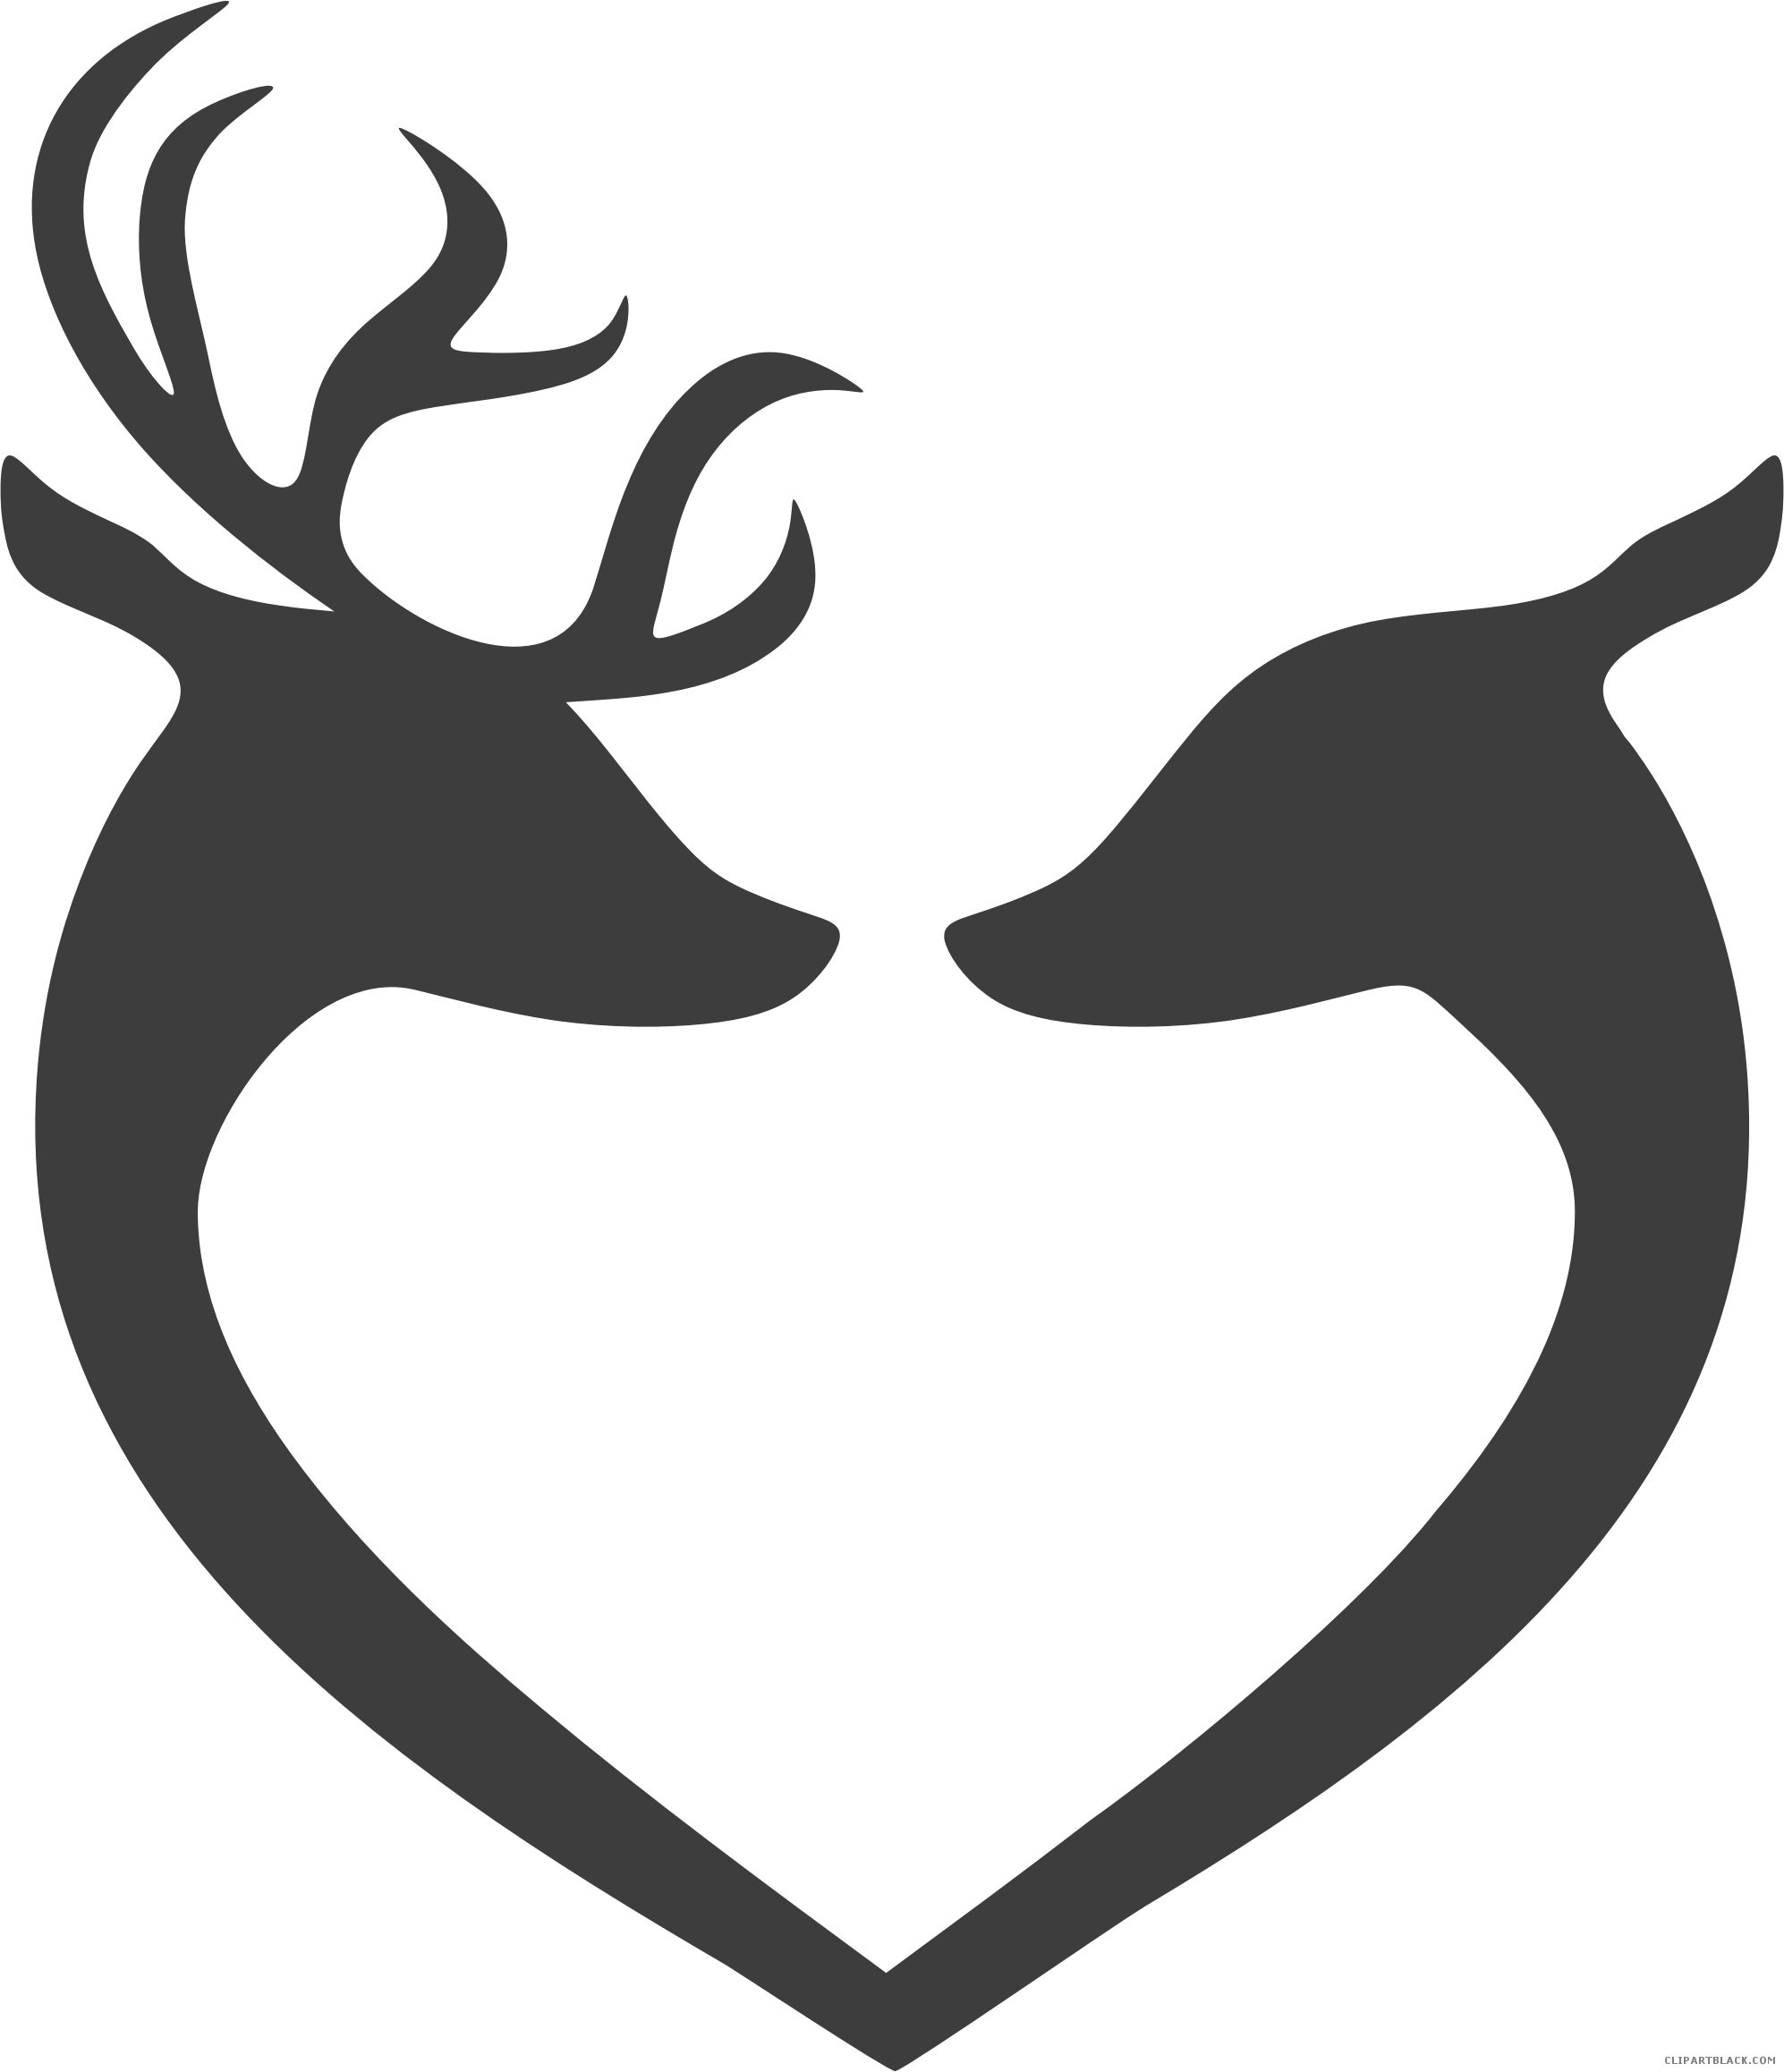 Deer Silhouette Animal Free Black White Clipart Images - Deer Couple Silhouette (1994x2316)